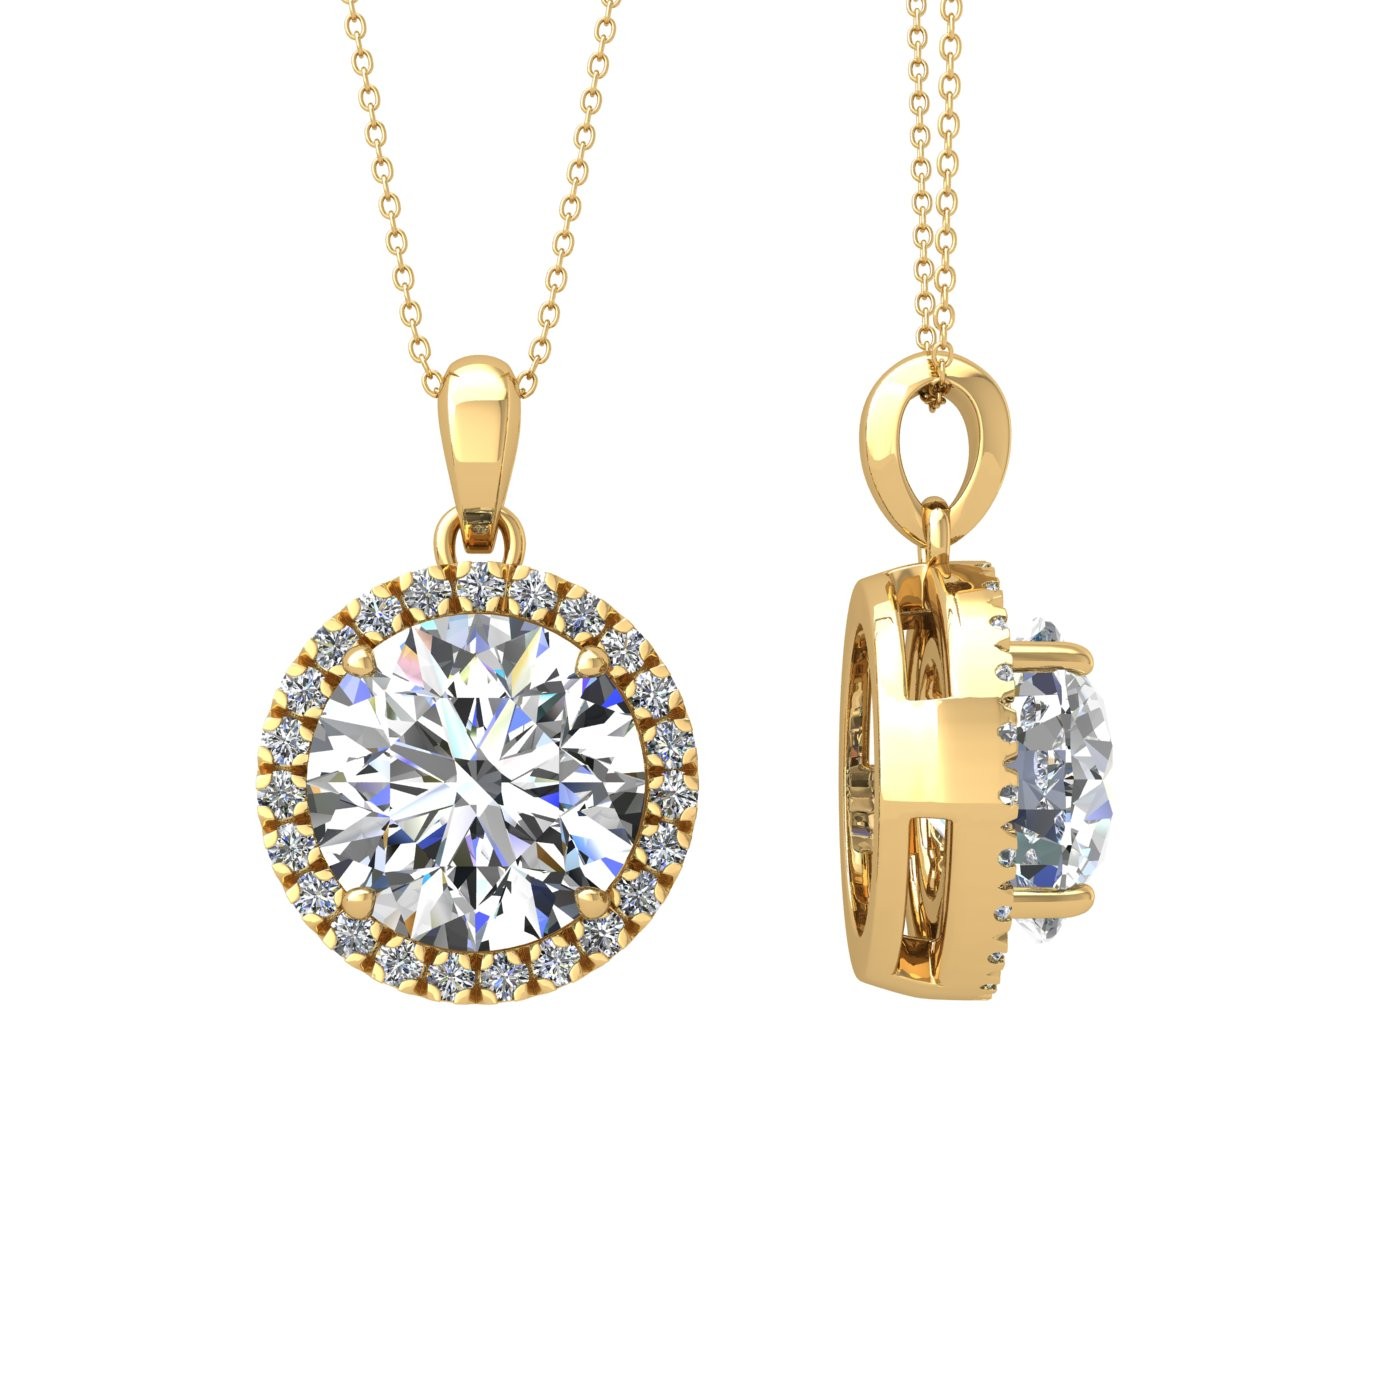 18k yellow gold  2,5 ct 4 prong round shape diamond pendant with diamond pavÉ set halo including chain seperate from the pendant